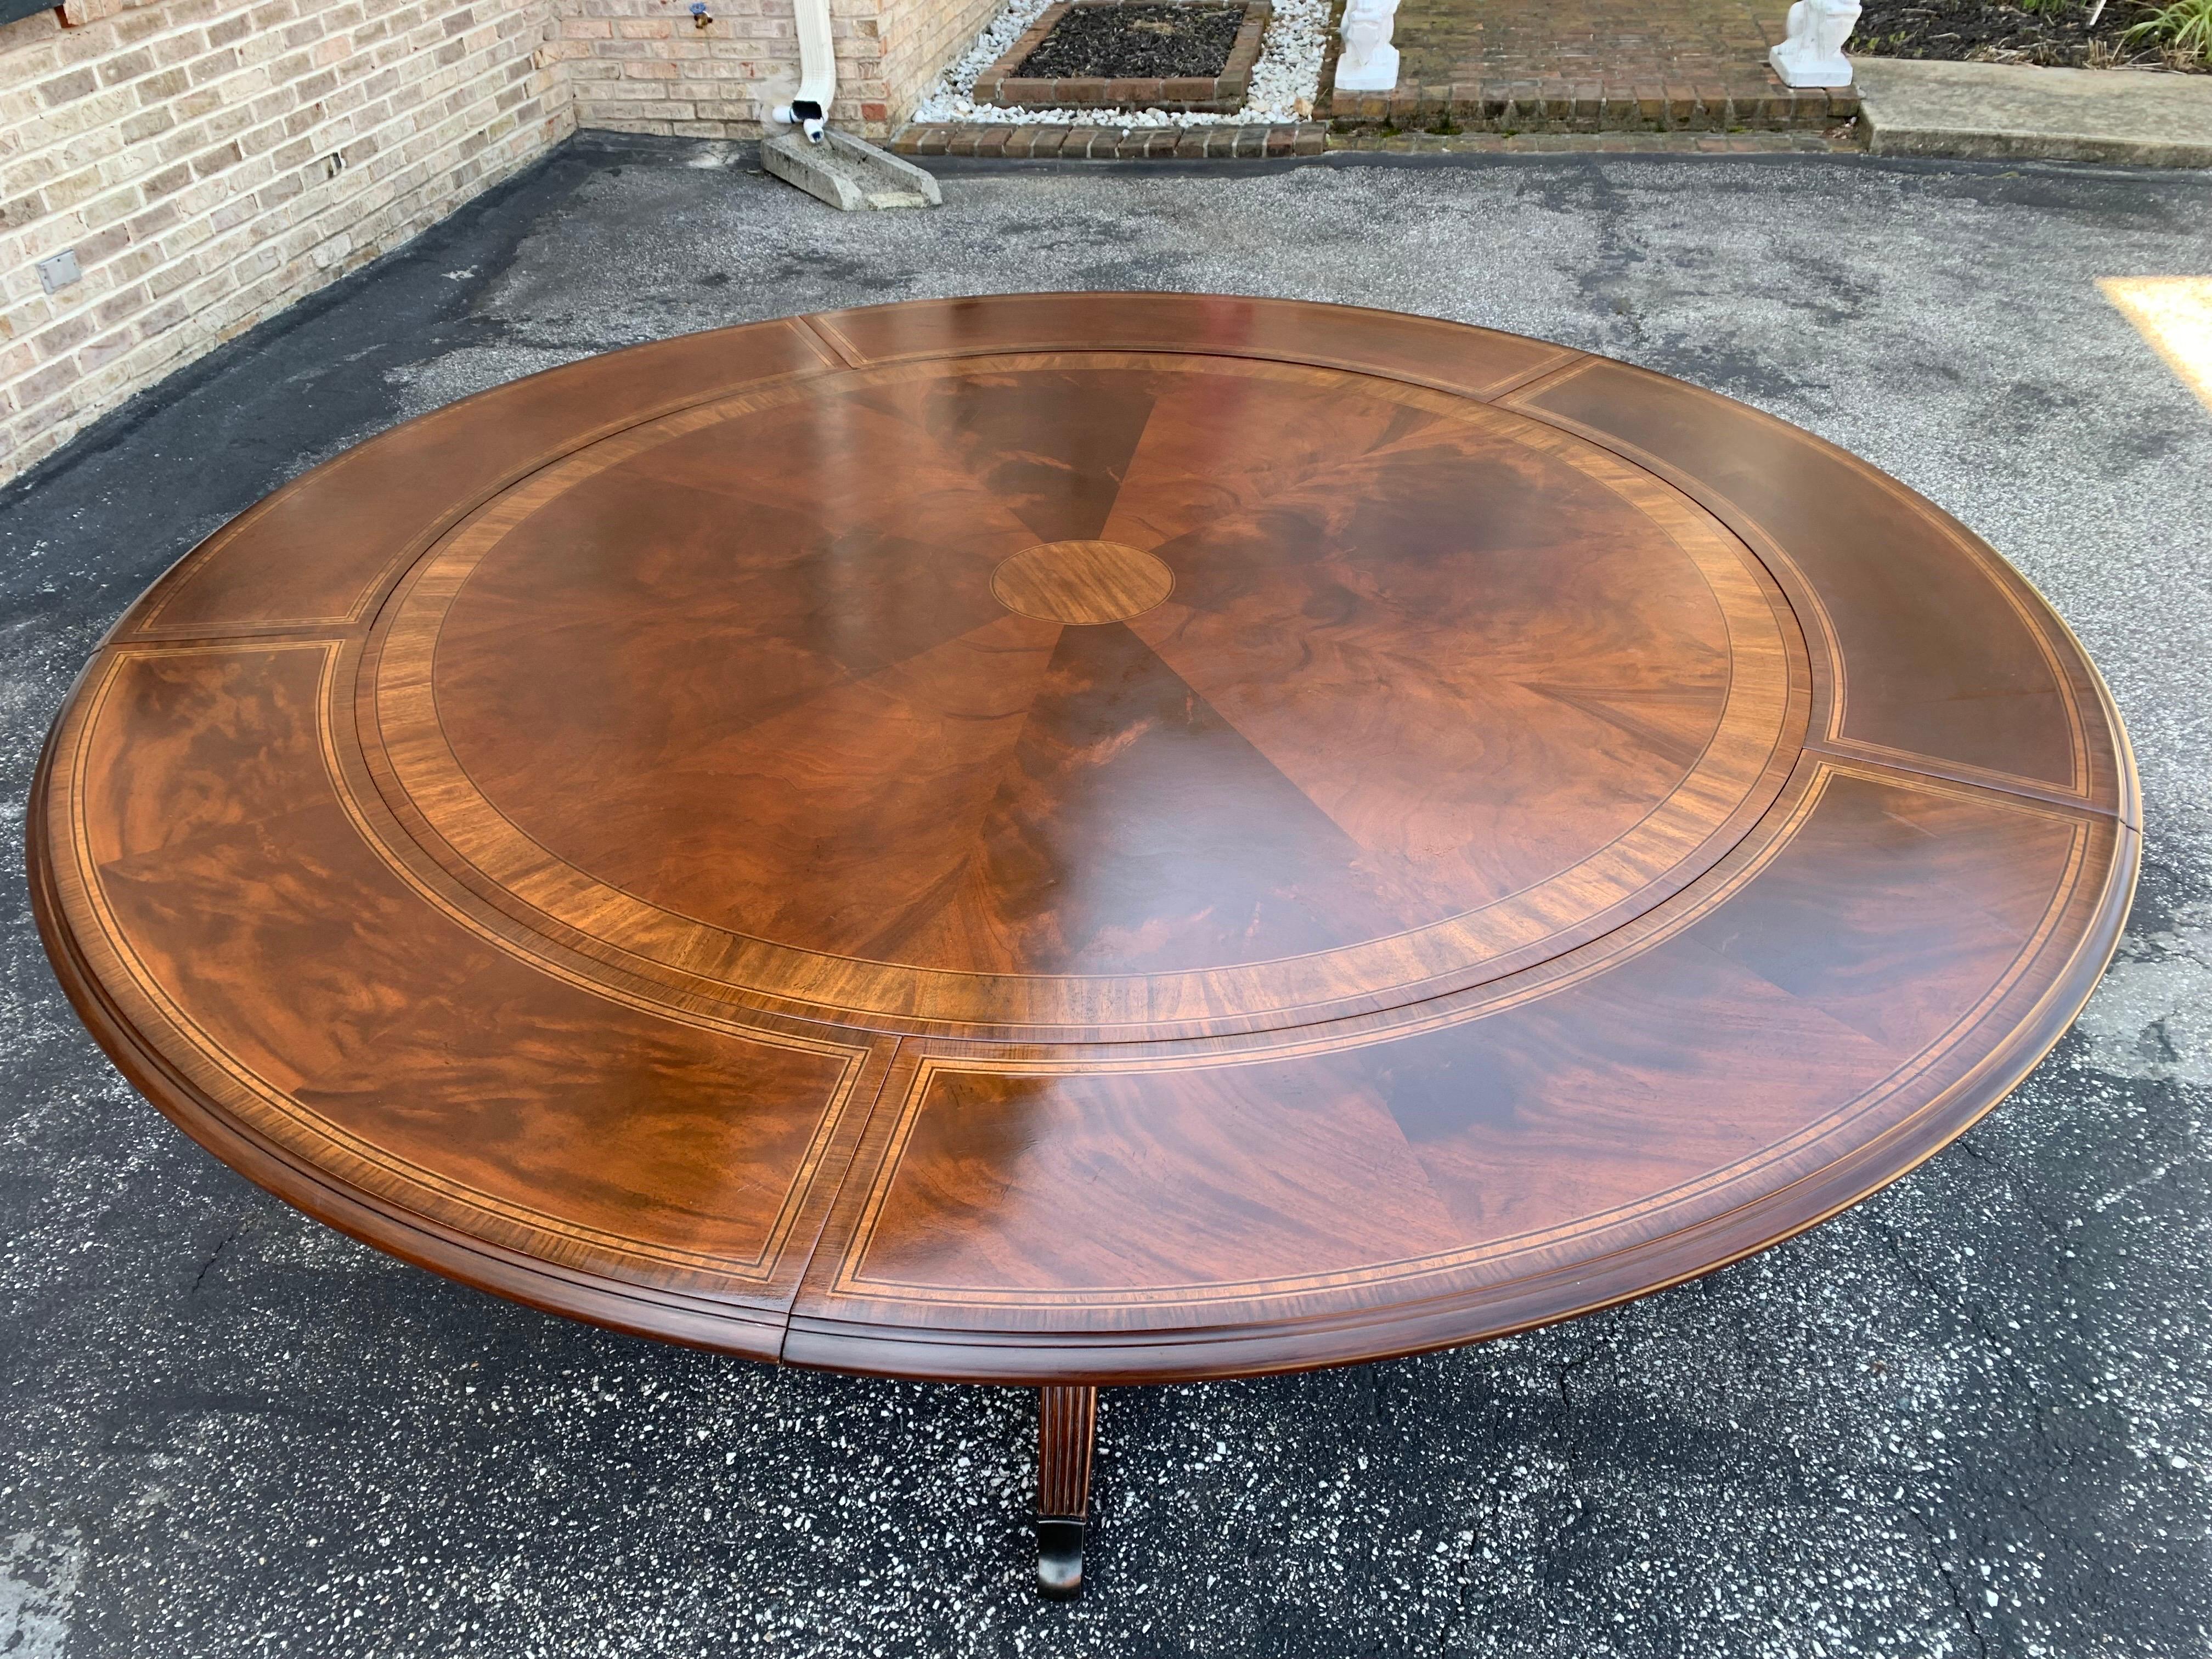 Mahogany Round Dining Table with Perimeter Leaves Oversized In Good Condition In Sparks Glencoe, MD